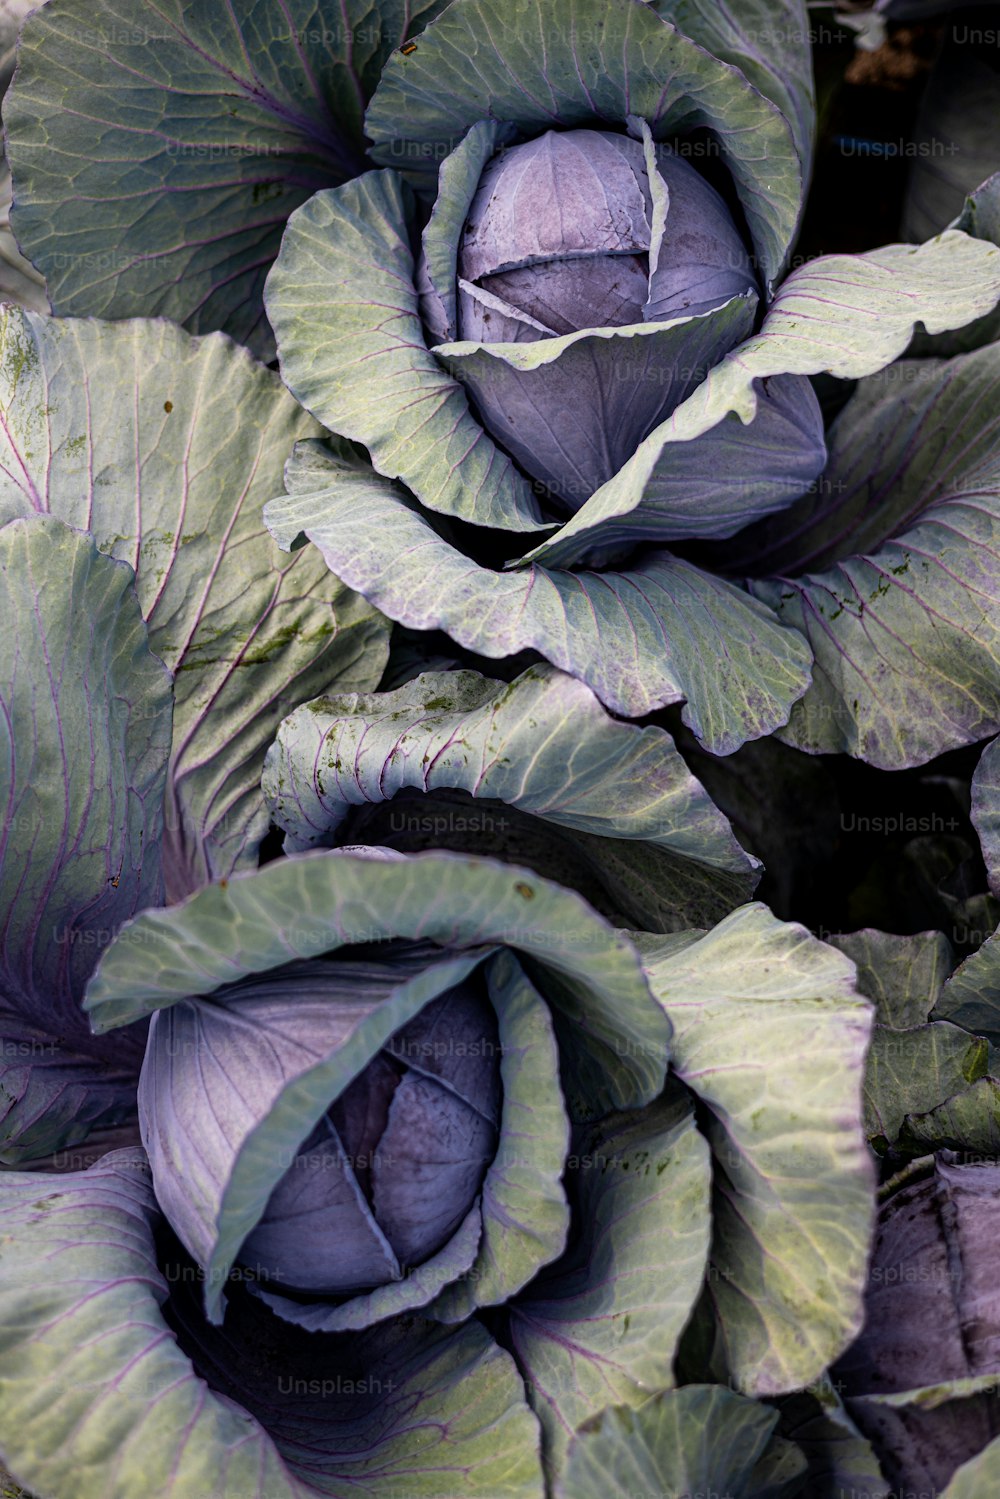 a close up of a group of cabbage plants